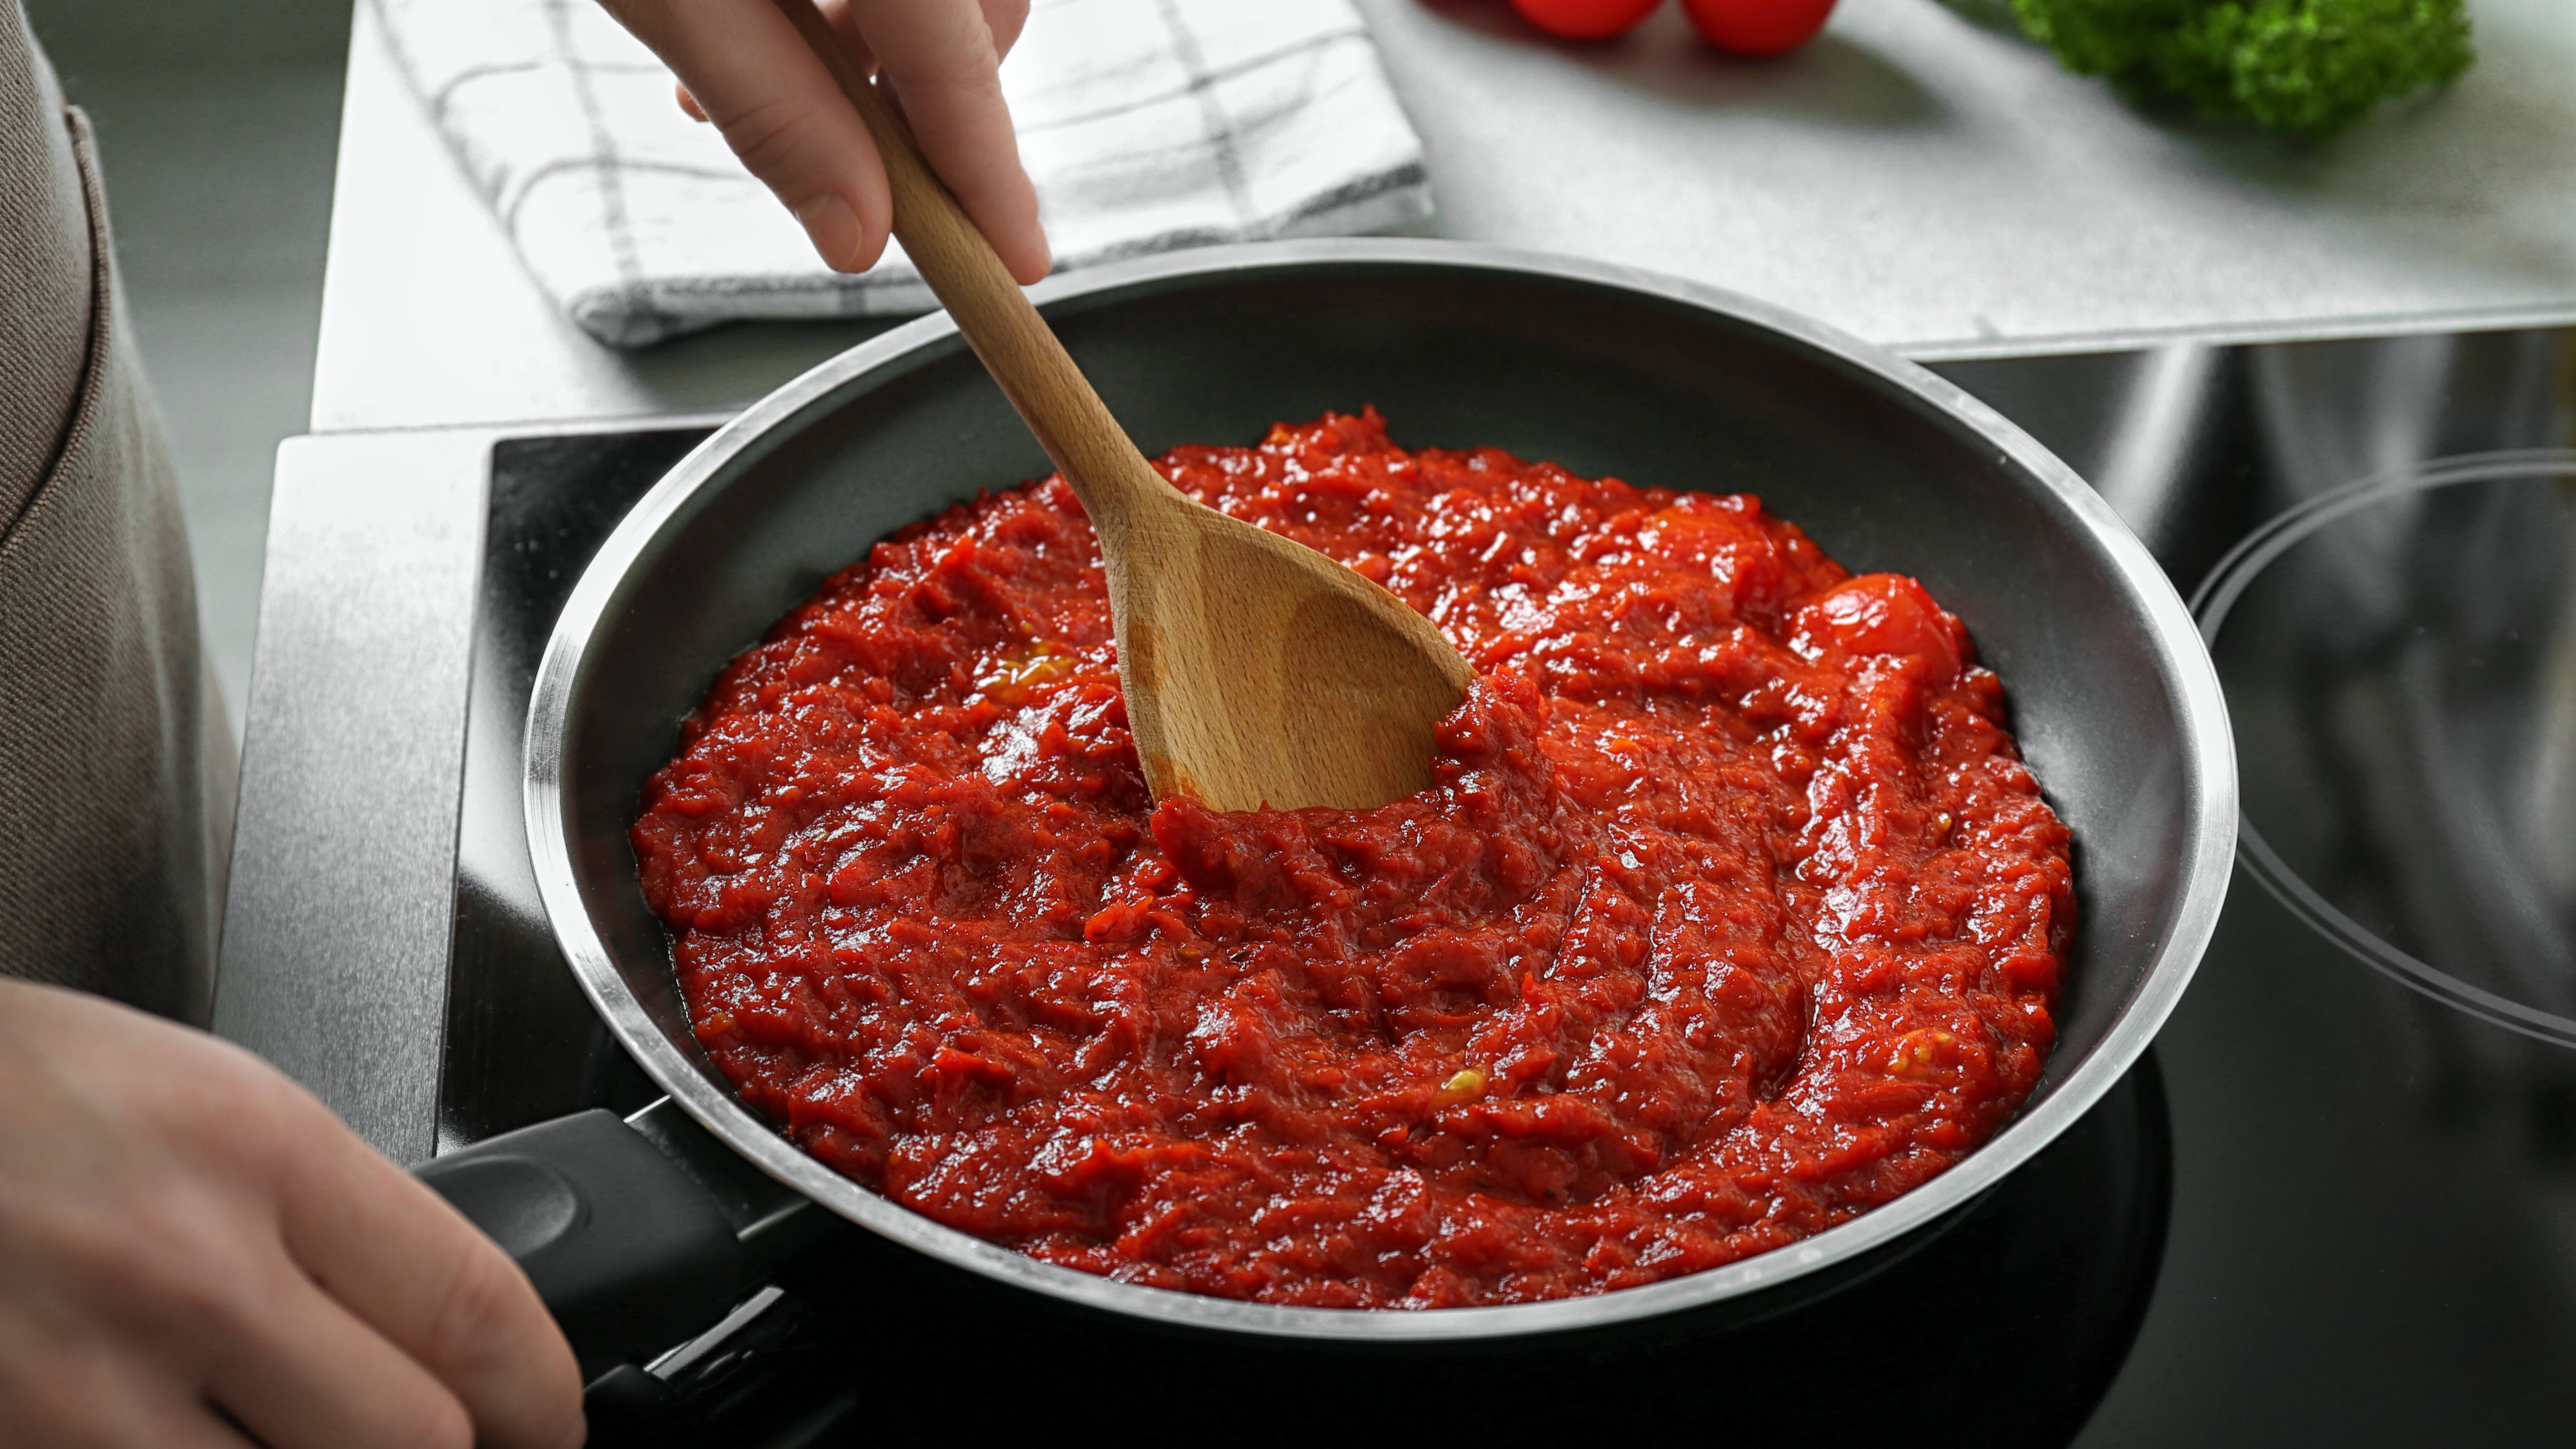 close up of a large frying pan with person at the stove cooking, stirring a red spaghetti or marinara sauce